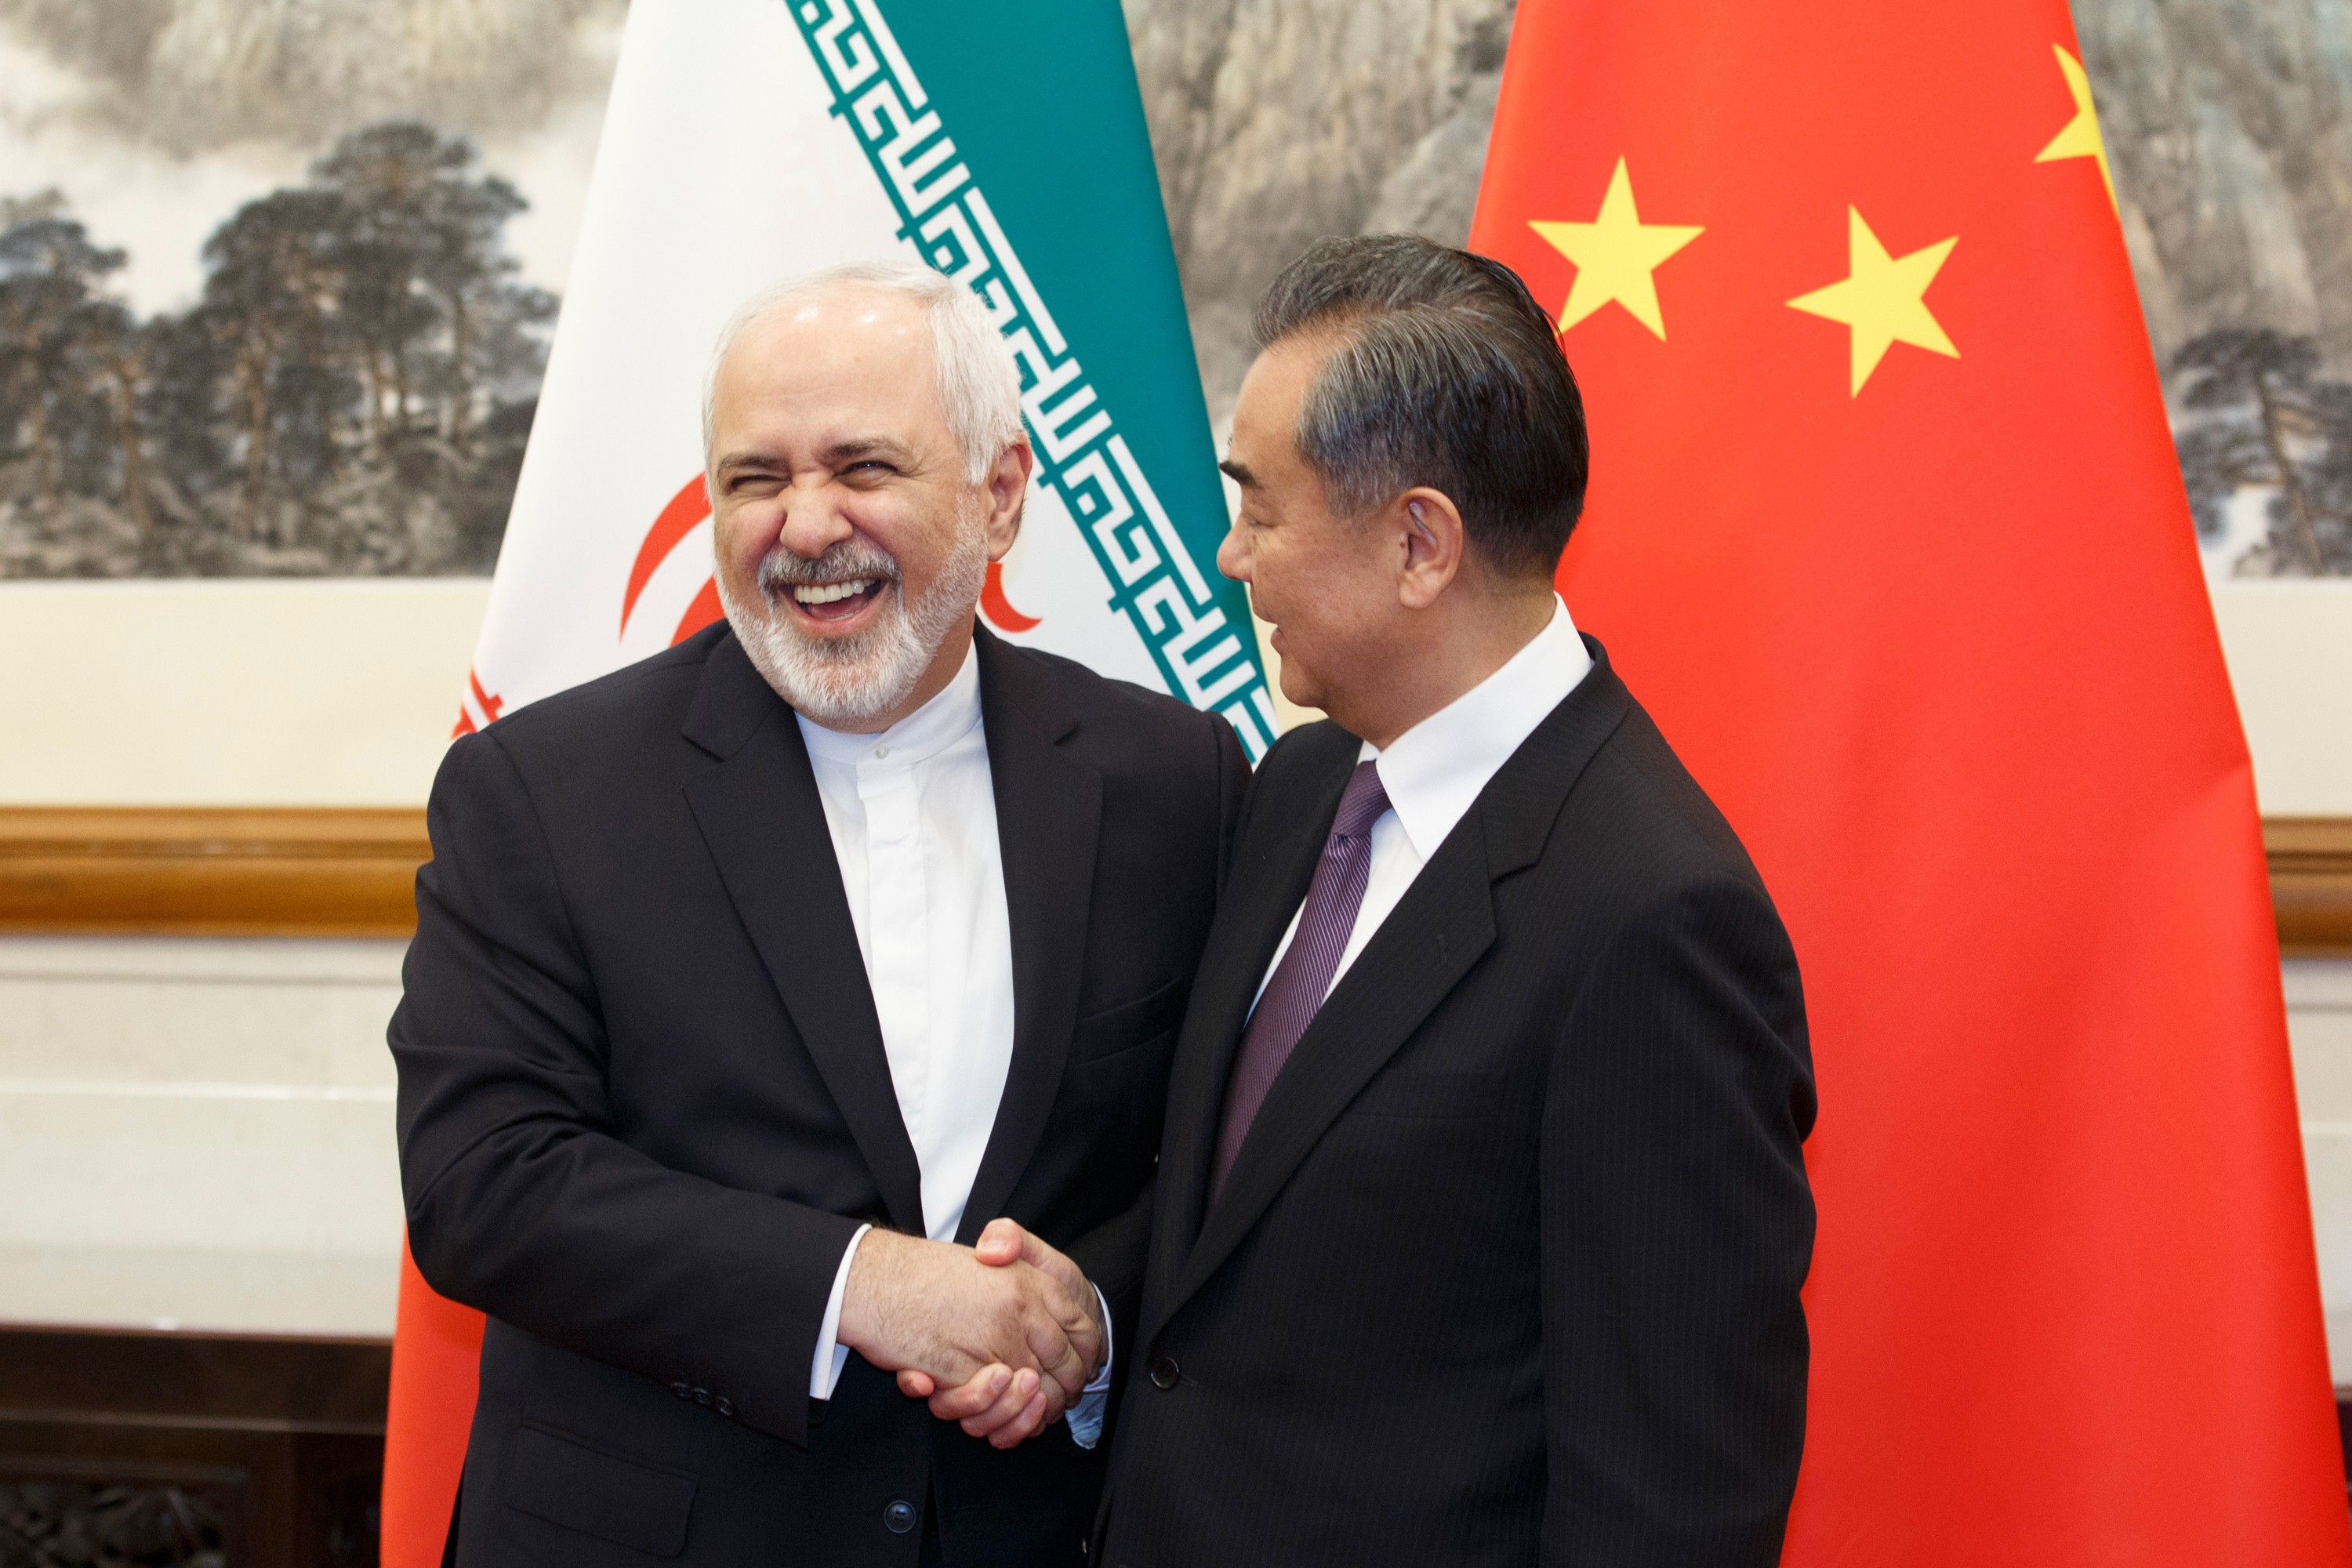 Iran's Foreign Minister Mohammad Javad Zarif meets China's Foreign Minister Wang Yi. Photo: AFP